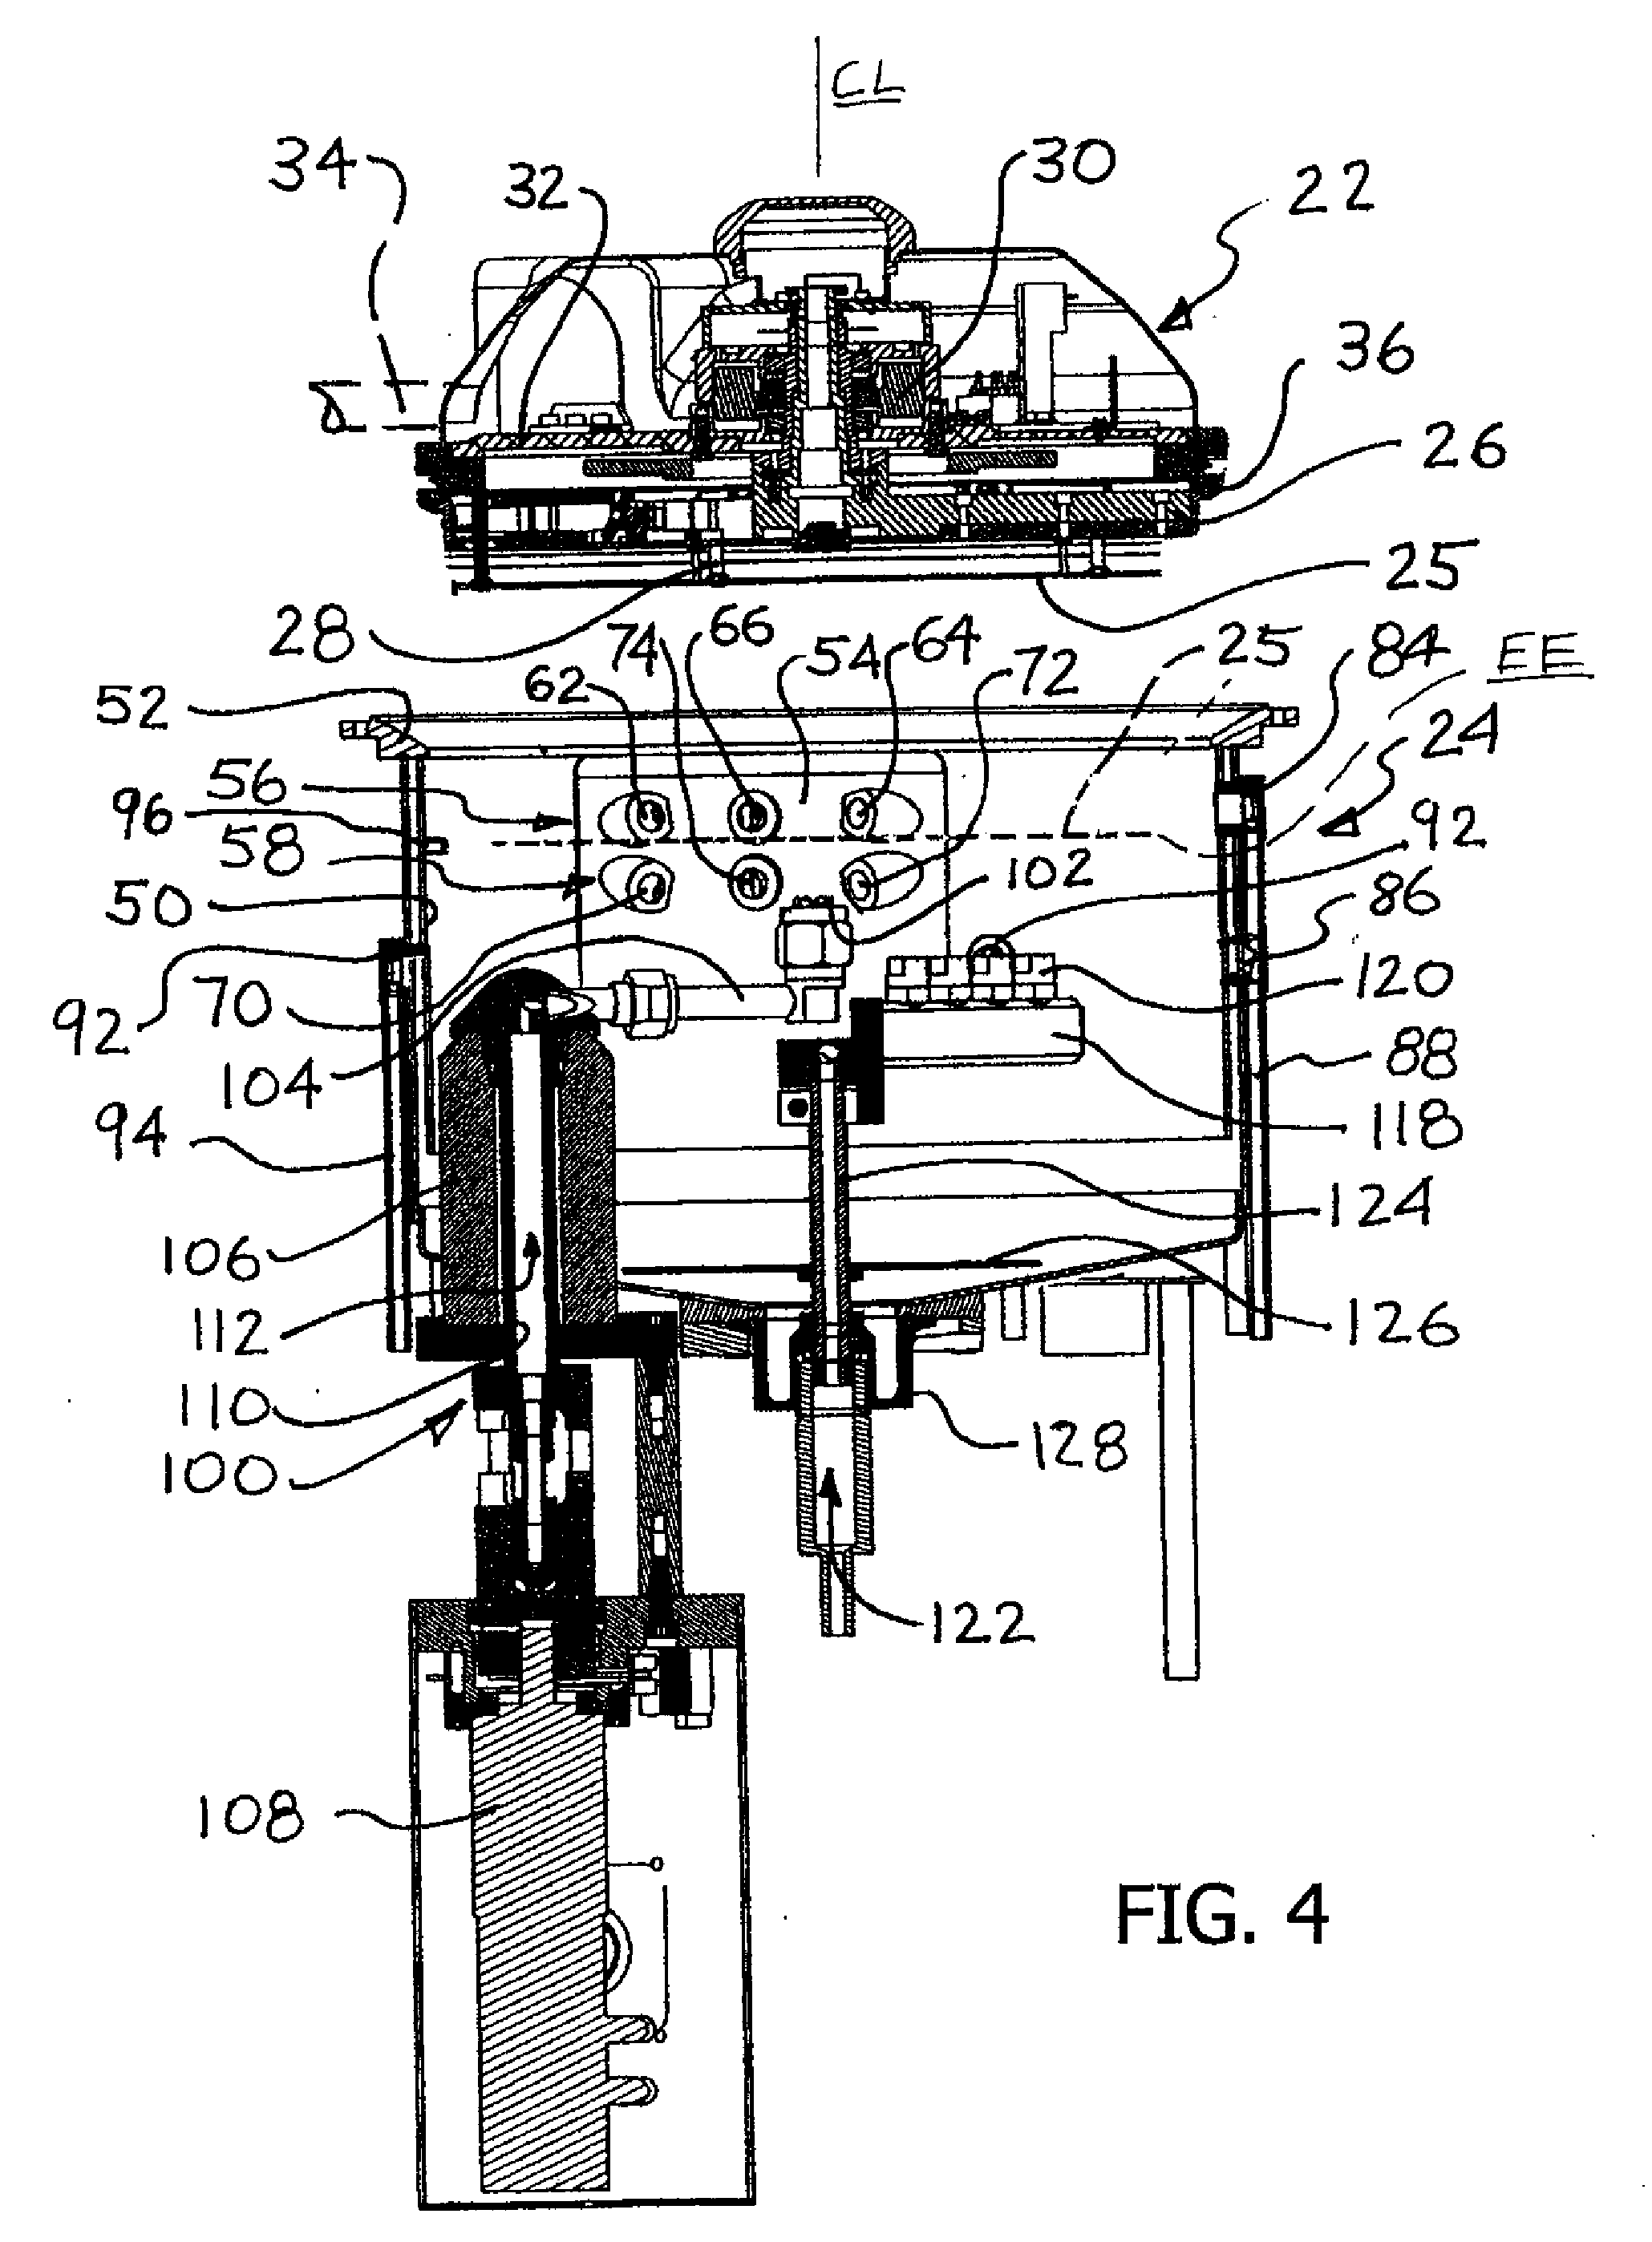 Methods and apparatus for cleaning edges of a substrate